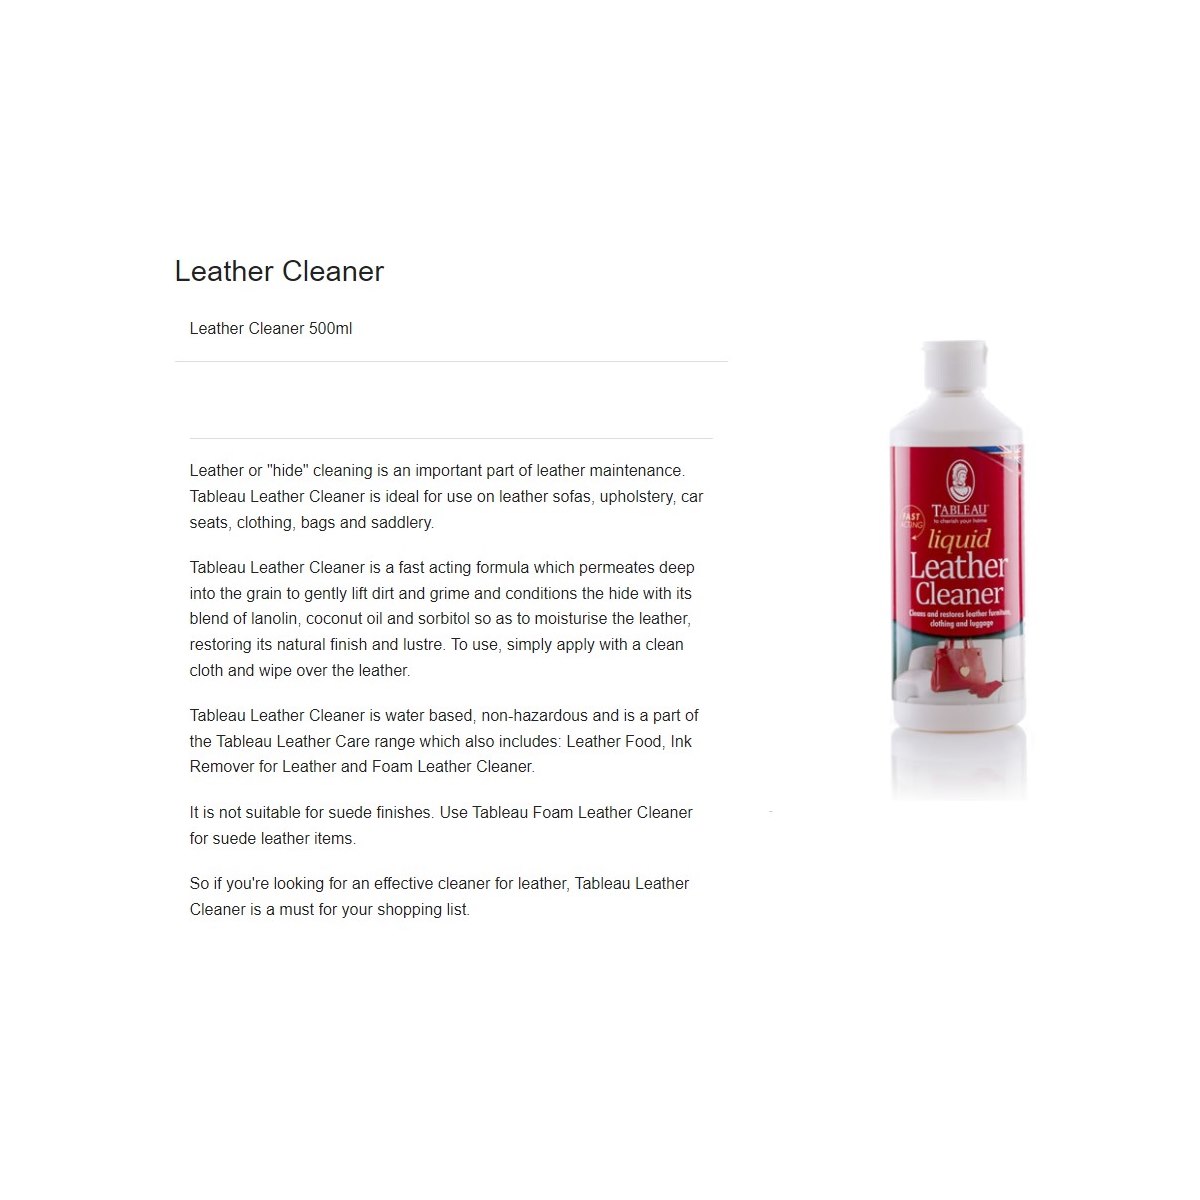 Tableau Leather Cleaner Usage Instructions